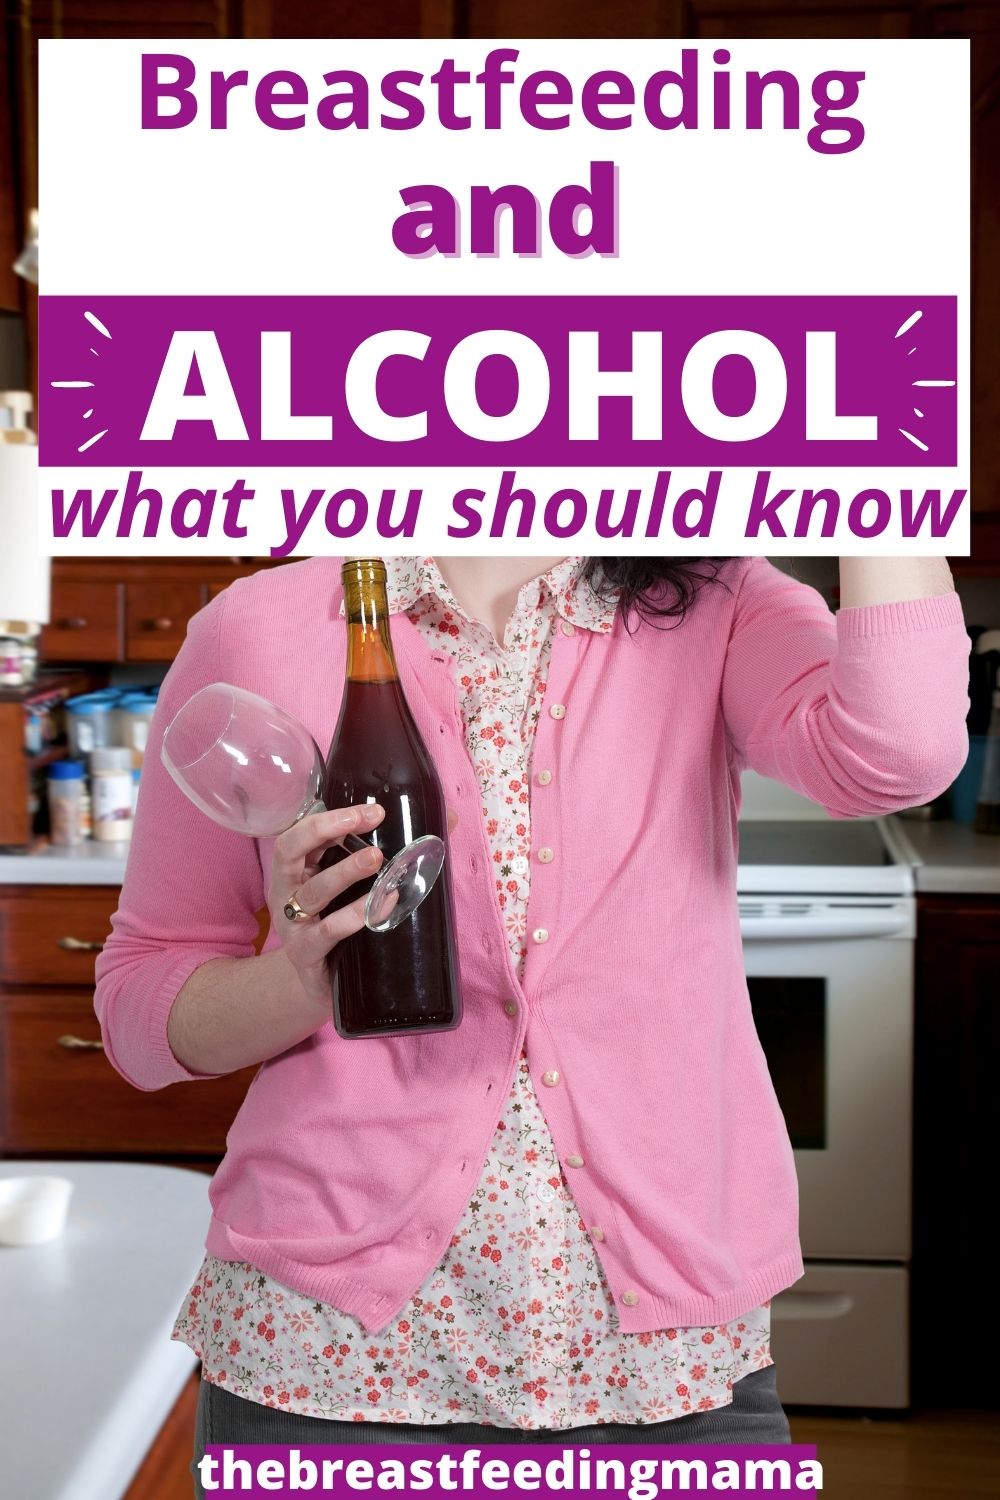 breastfeeding and alcohol - what you should know